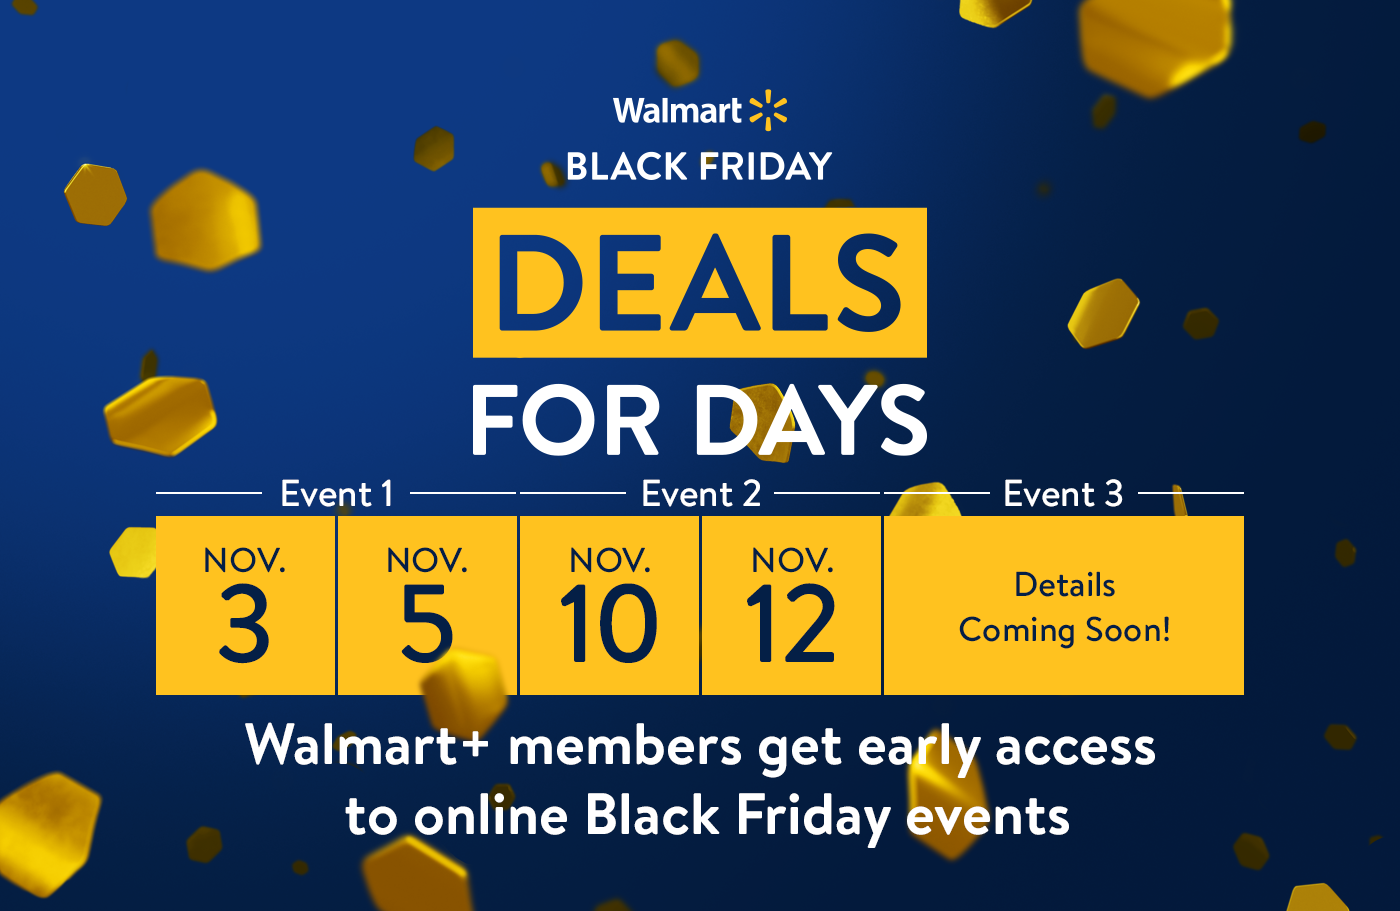 Walmart's Black Friday Deals for Days launch today with early